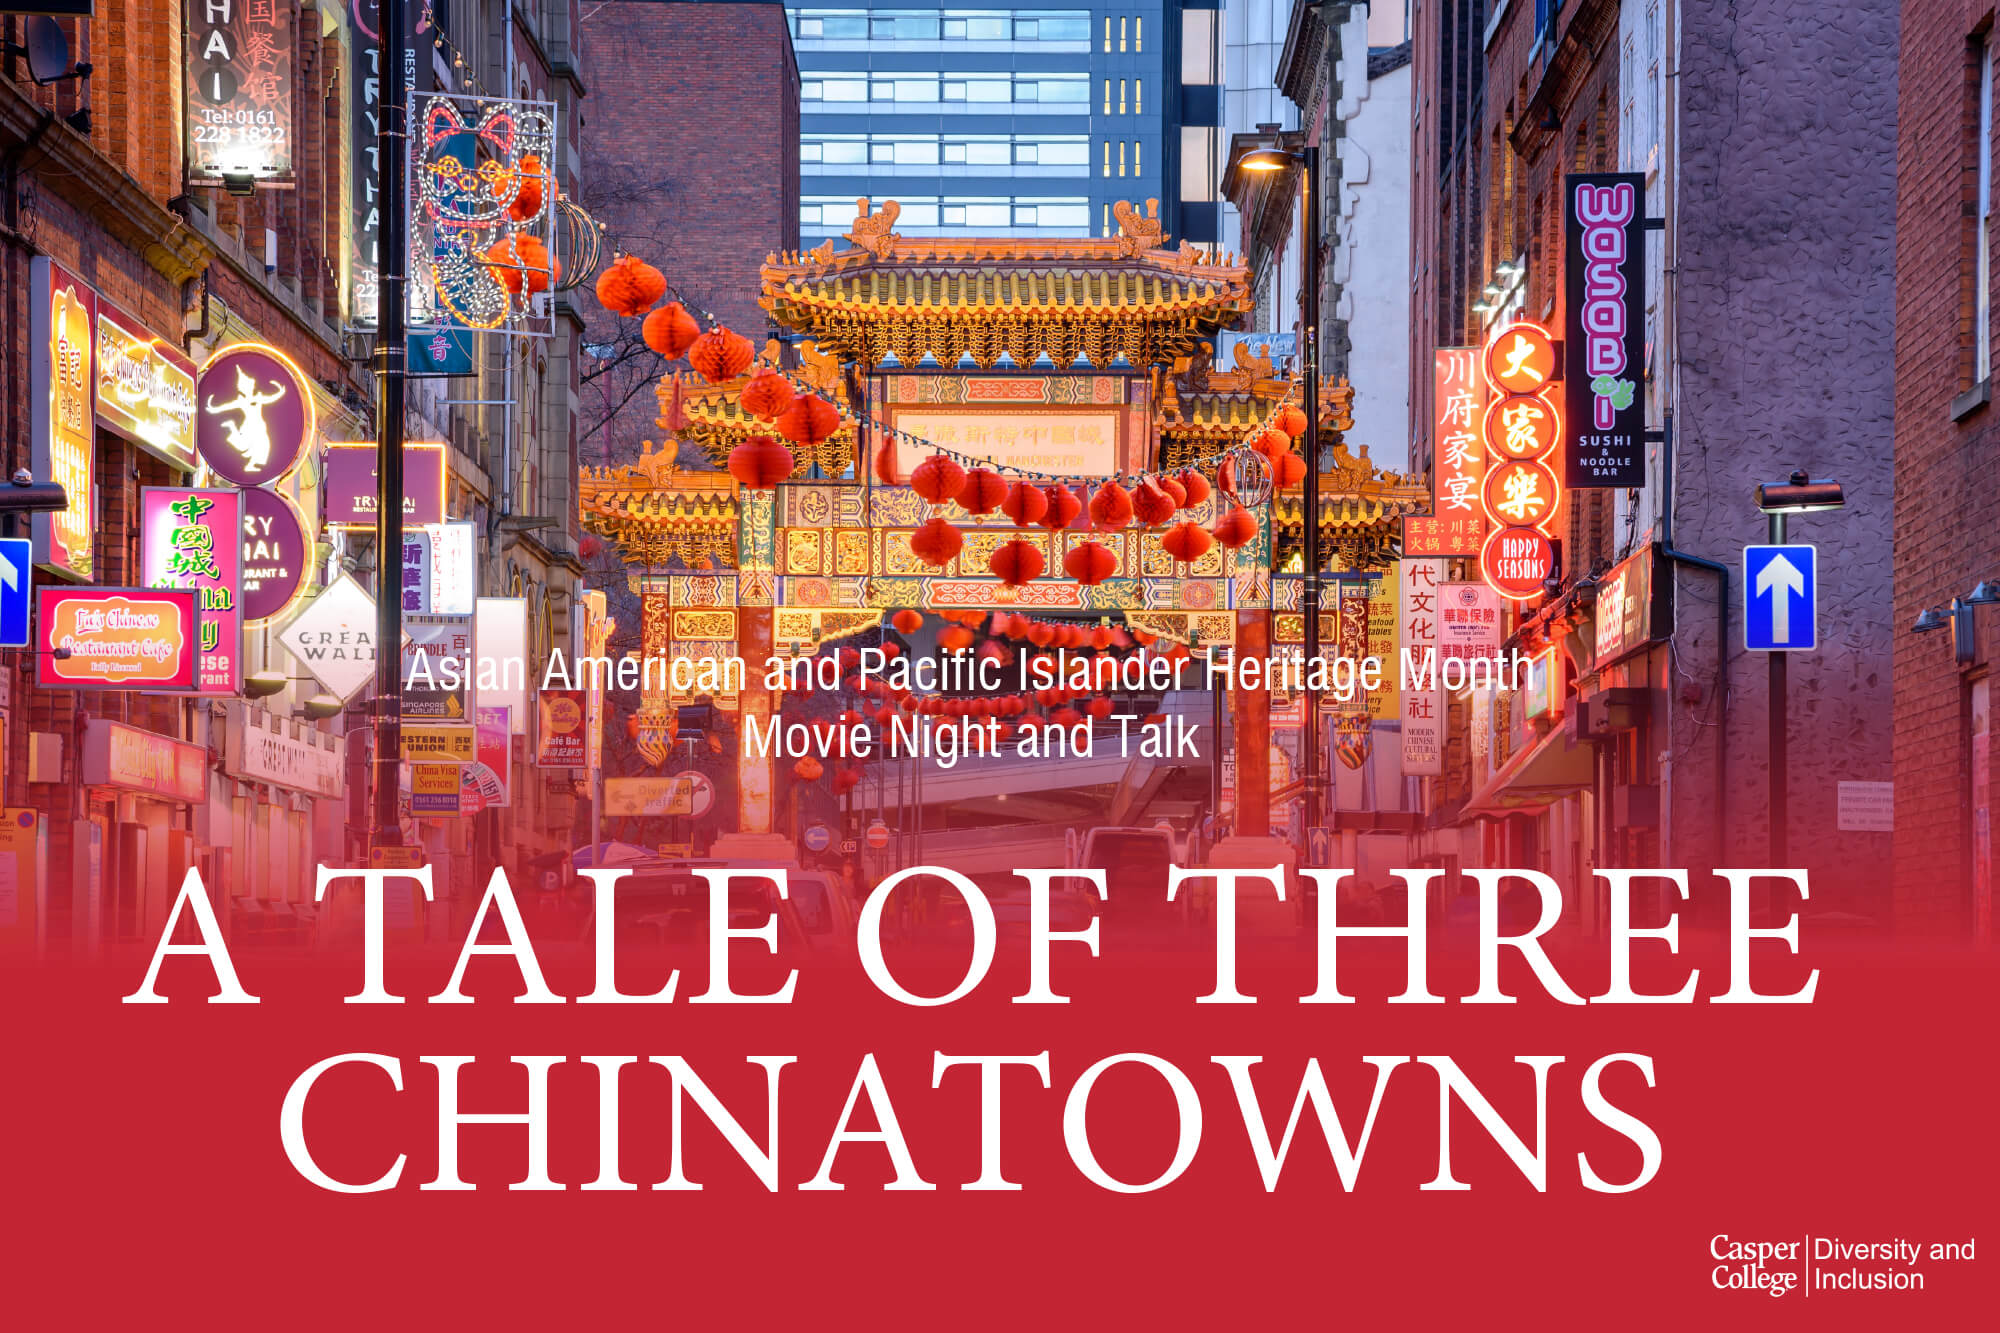 Image for "A Tale of Three Chinatowns" event press release.